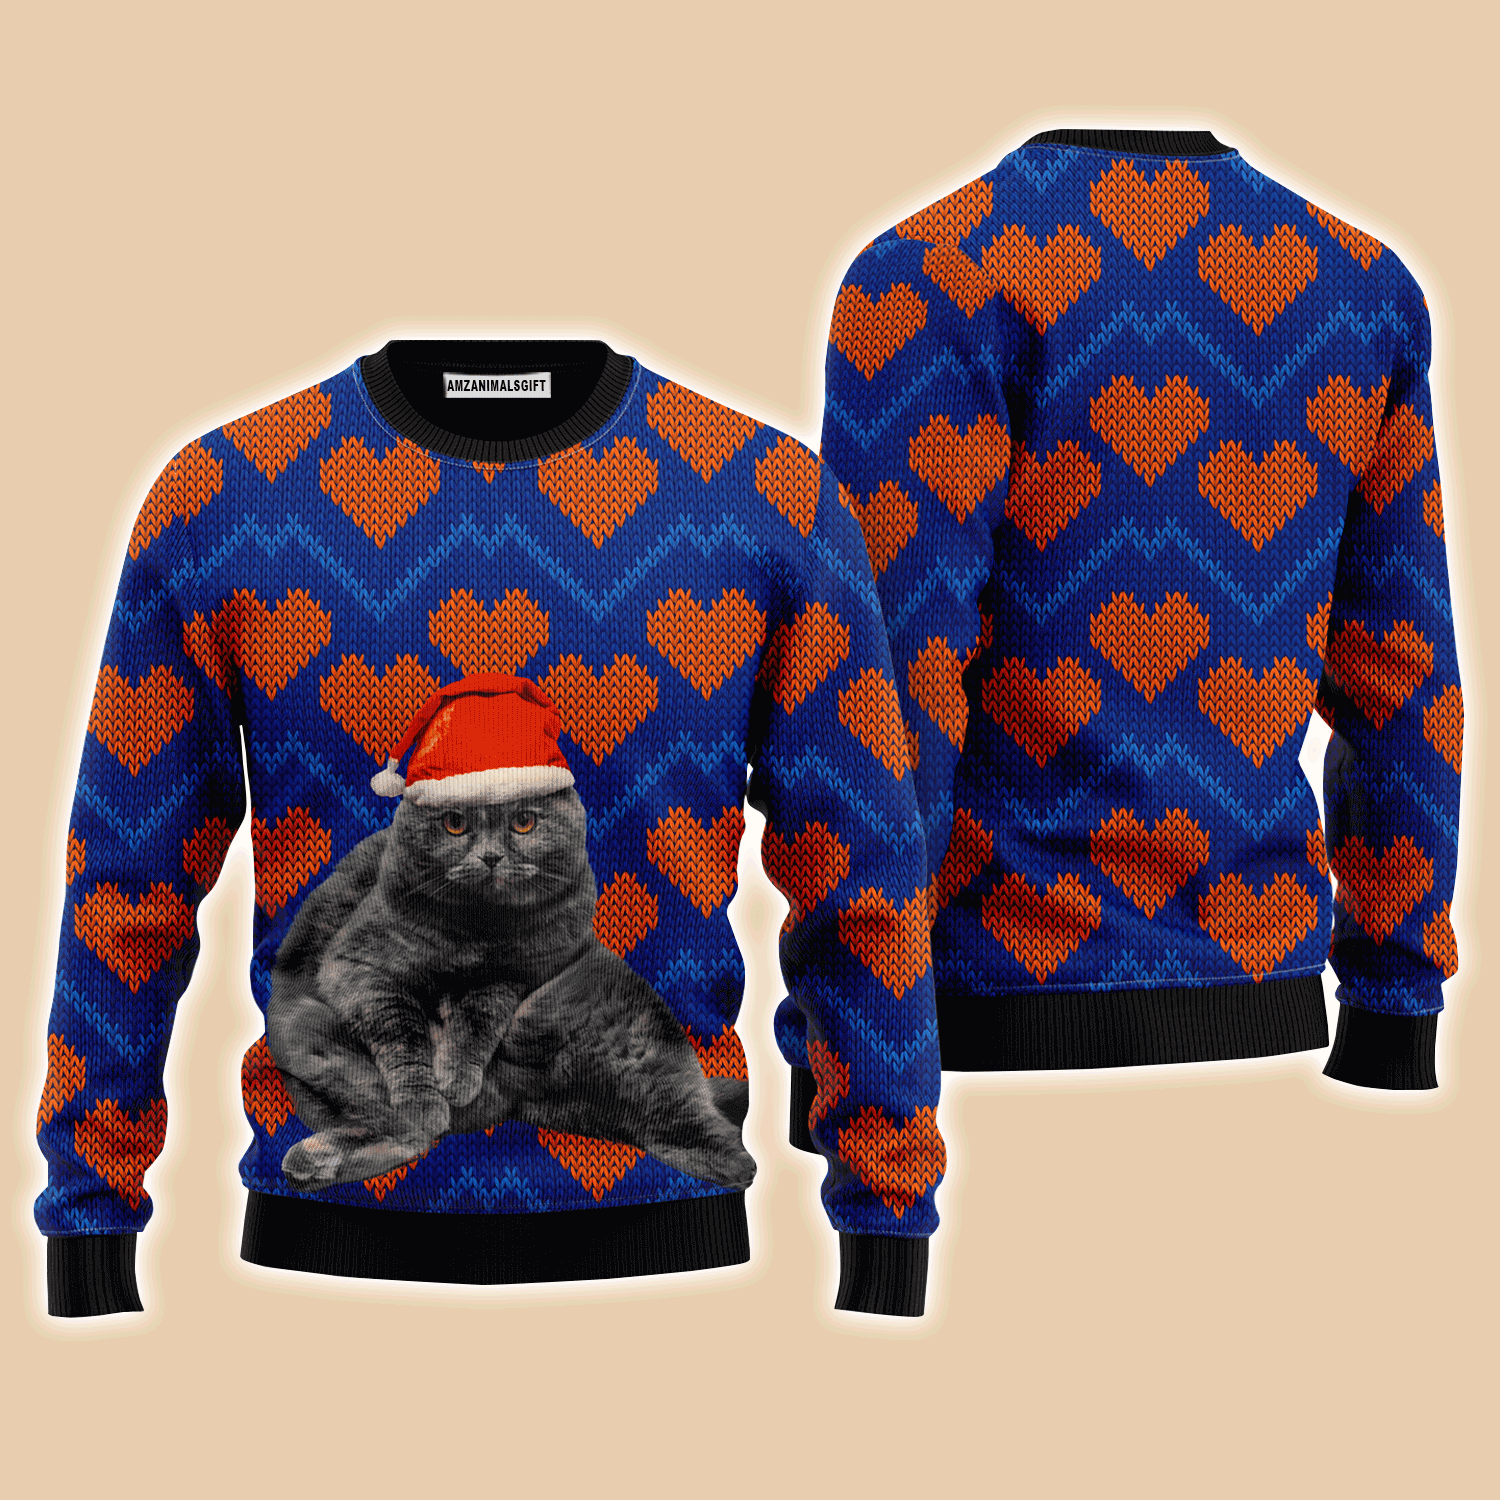 Black Cat Sweater In Heart Love, Ugly Sweater For Men & Women, Perfect Outfit For Christmas New Year Autumn Winter